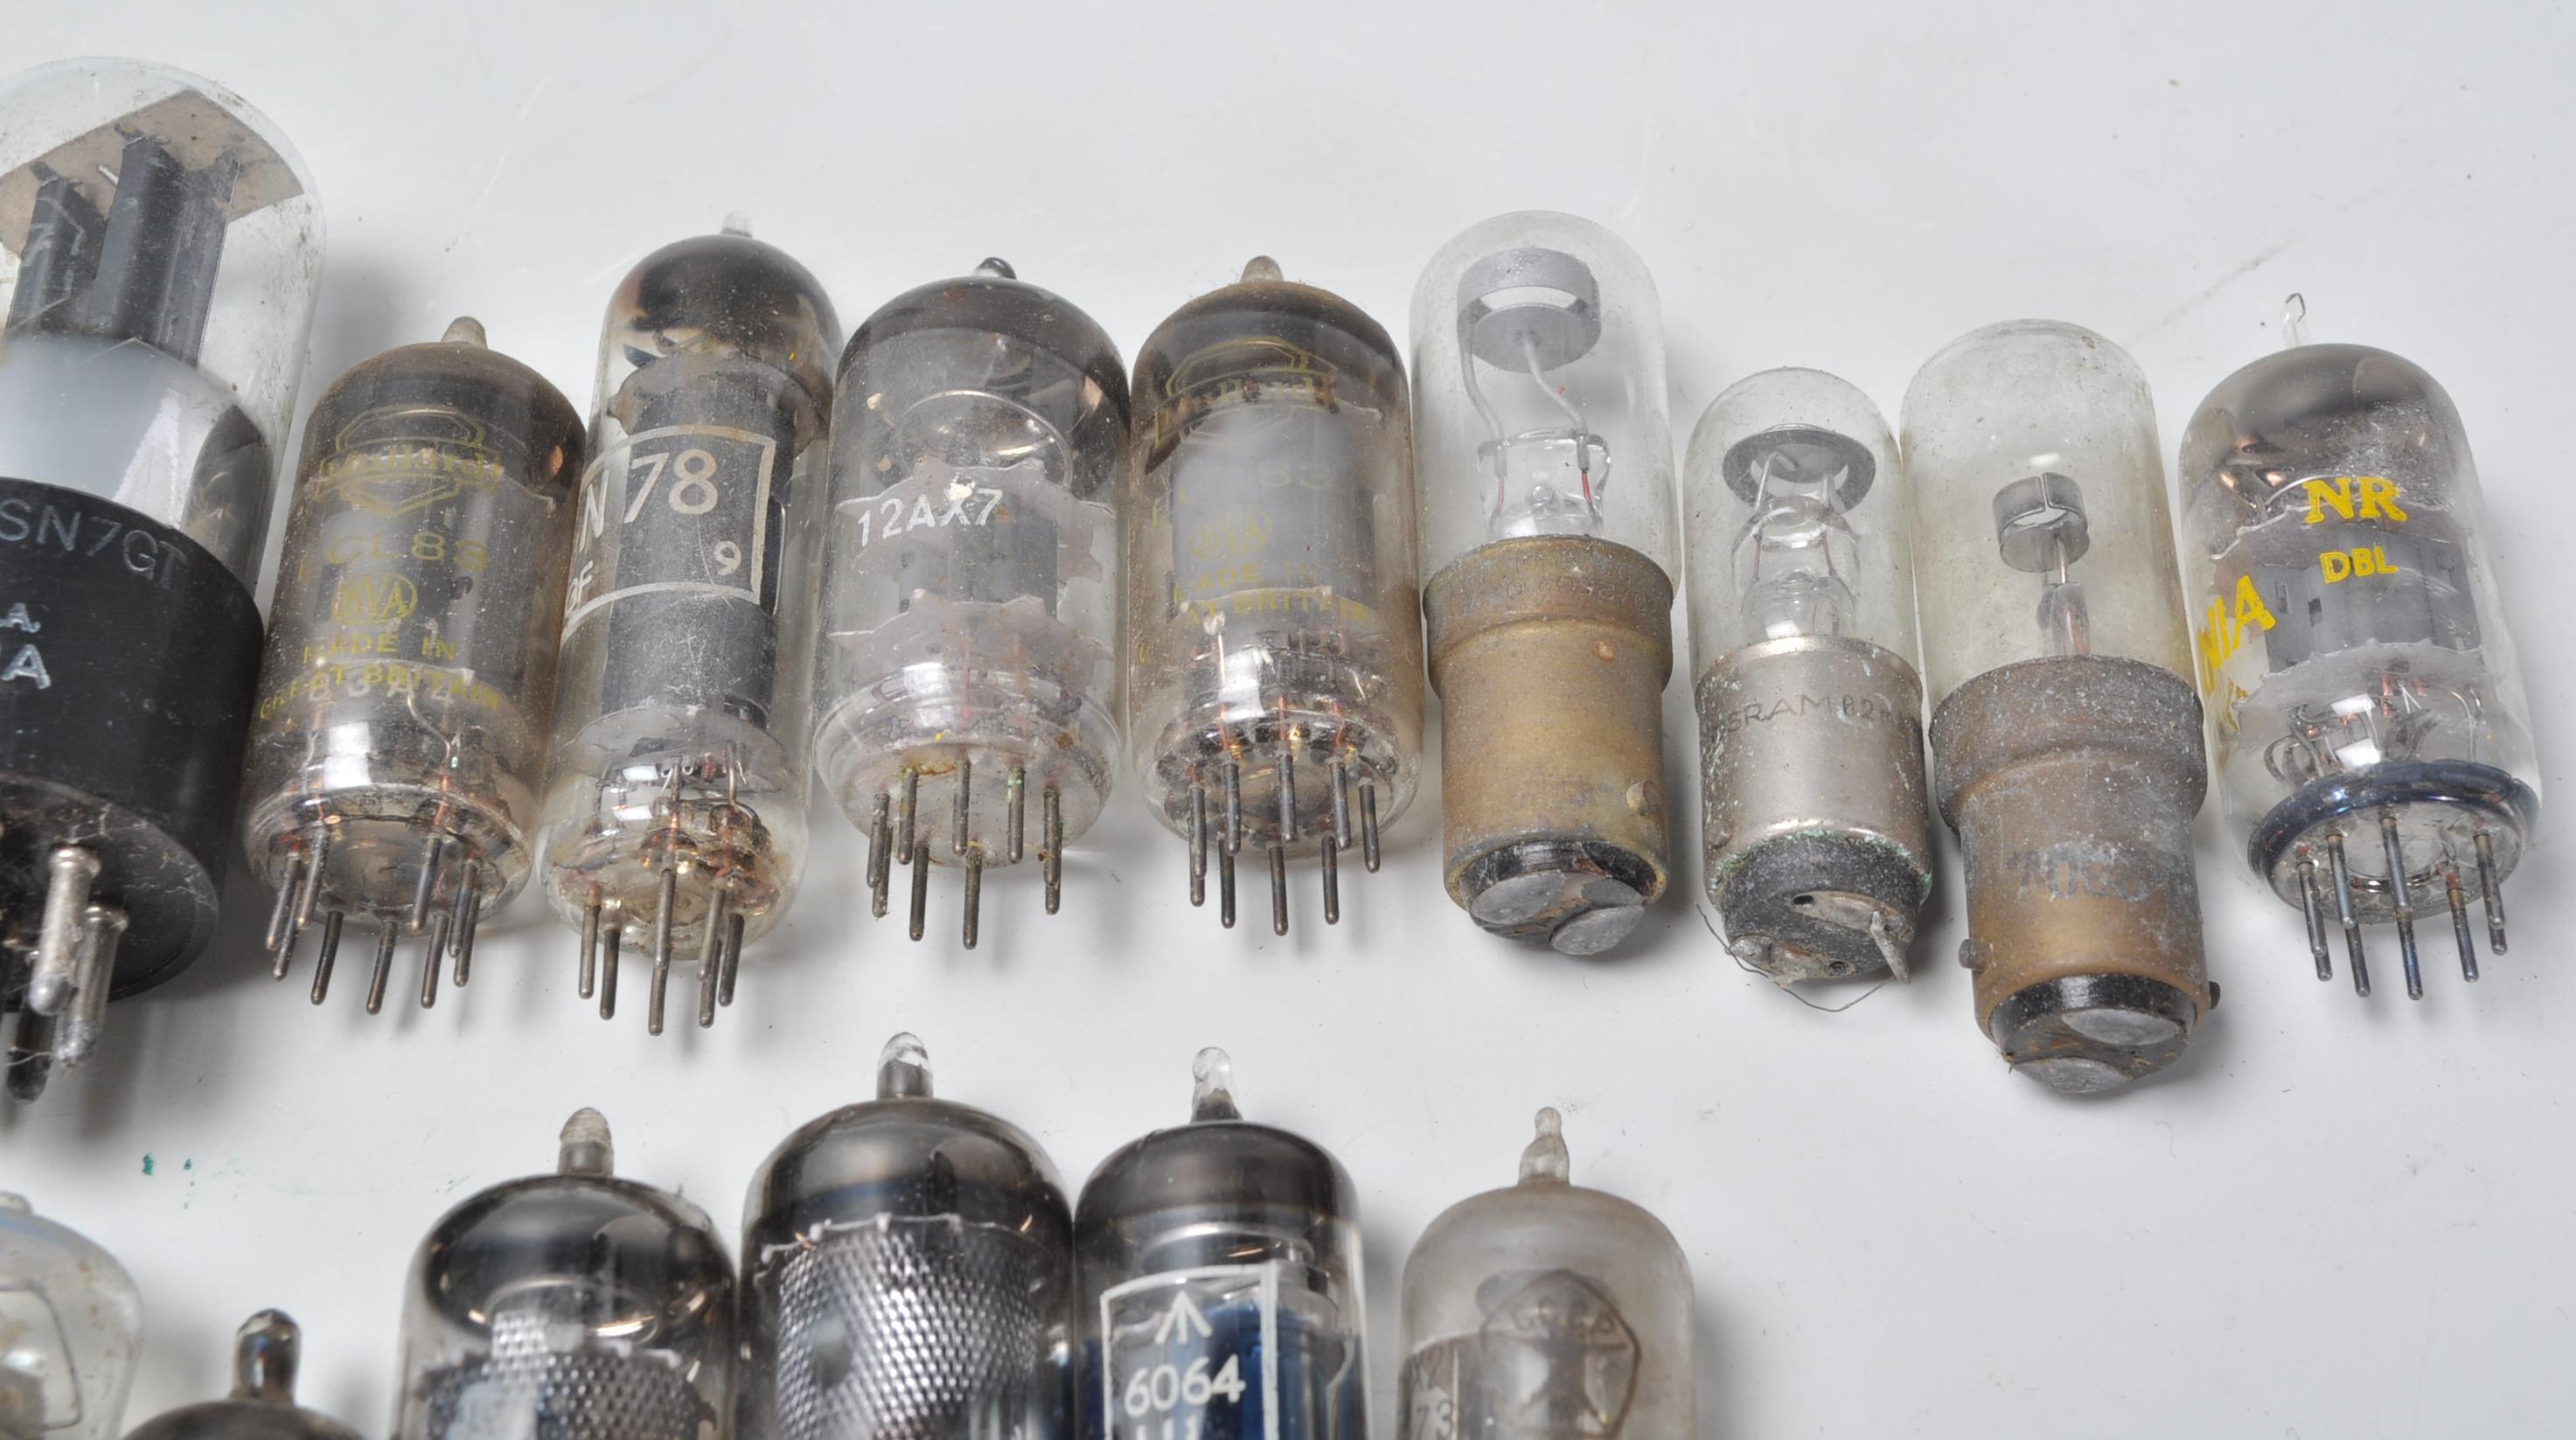 A collection of vintage mixed radio valves to include EC83, EZ81, Ediswate UCH42, Mullard EZ81 - Image 16 of 21